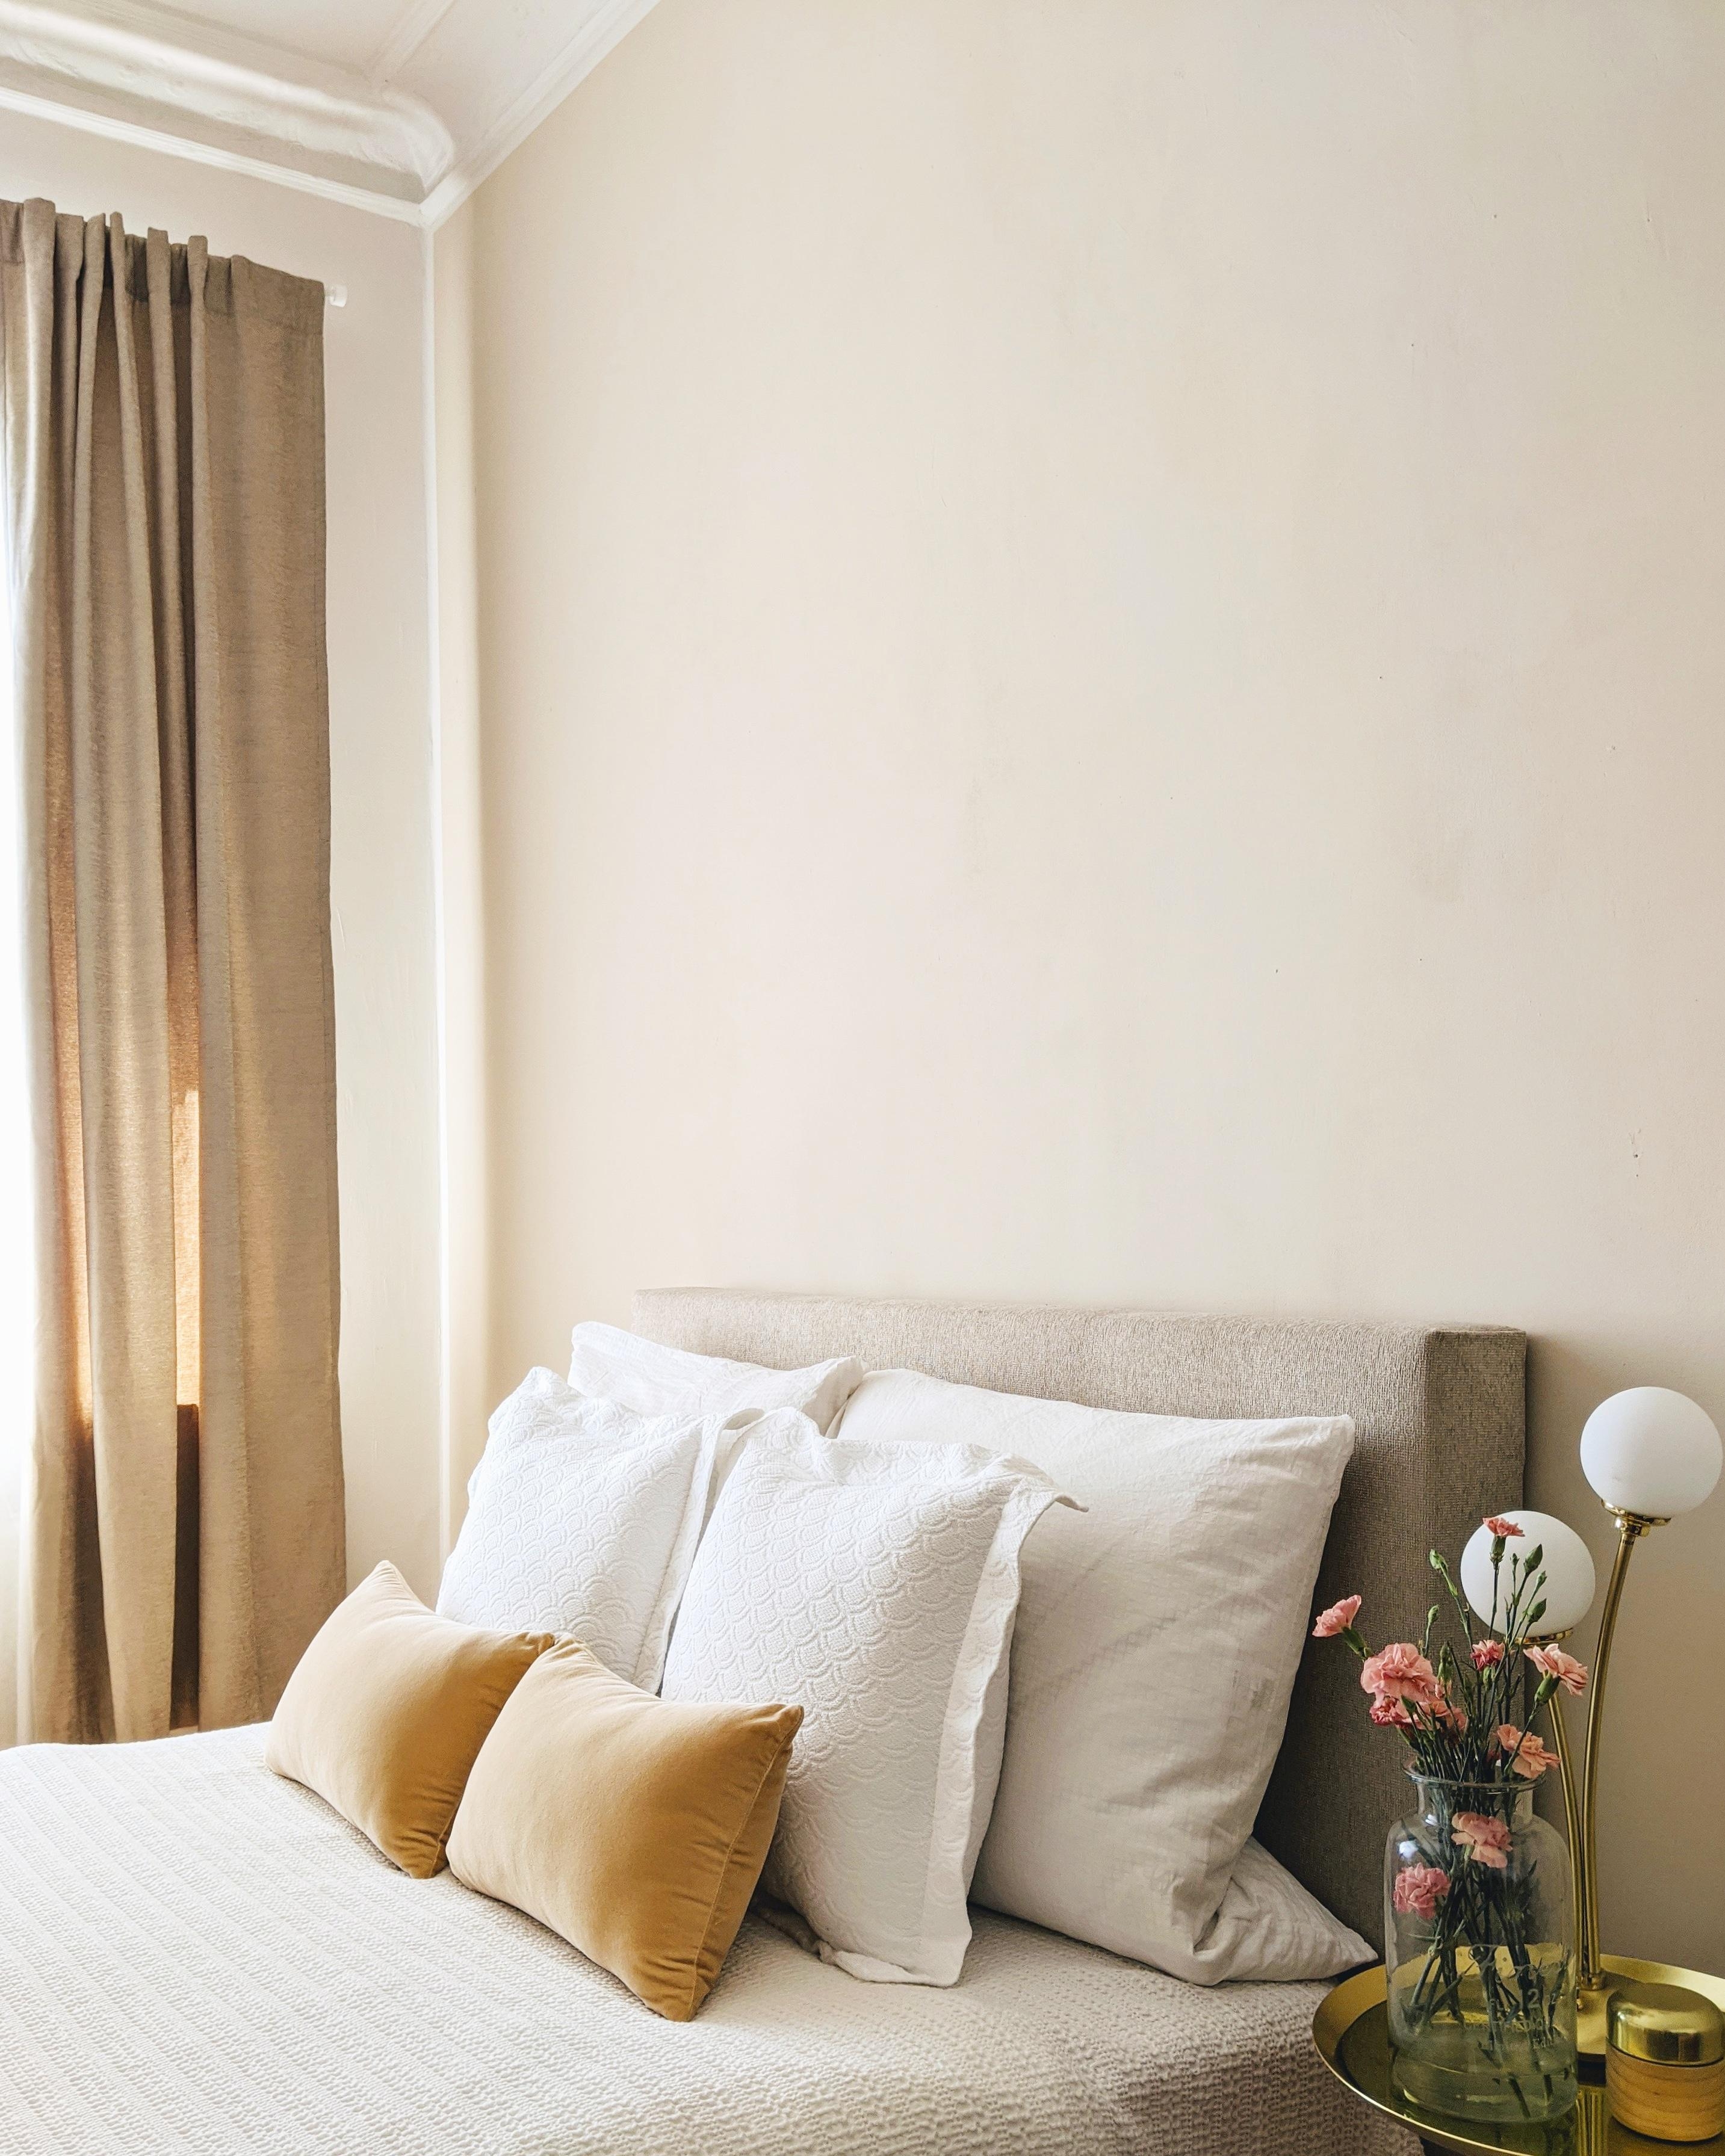 Clean & Simple. #bedroom #bedding #couchstyle #schlafzimmer #softcolours